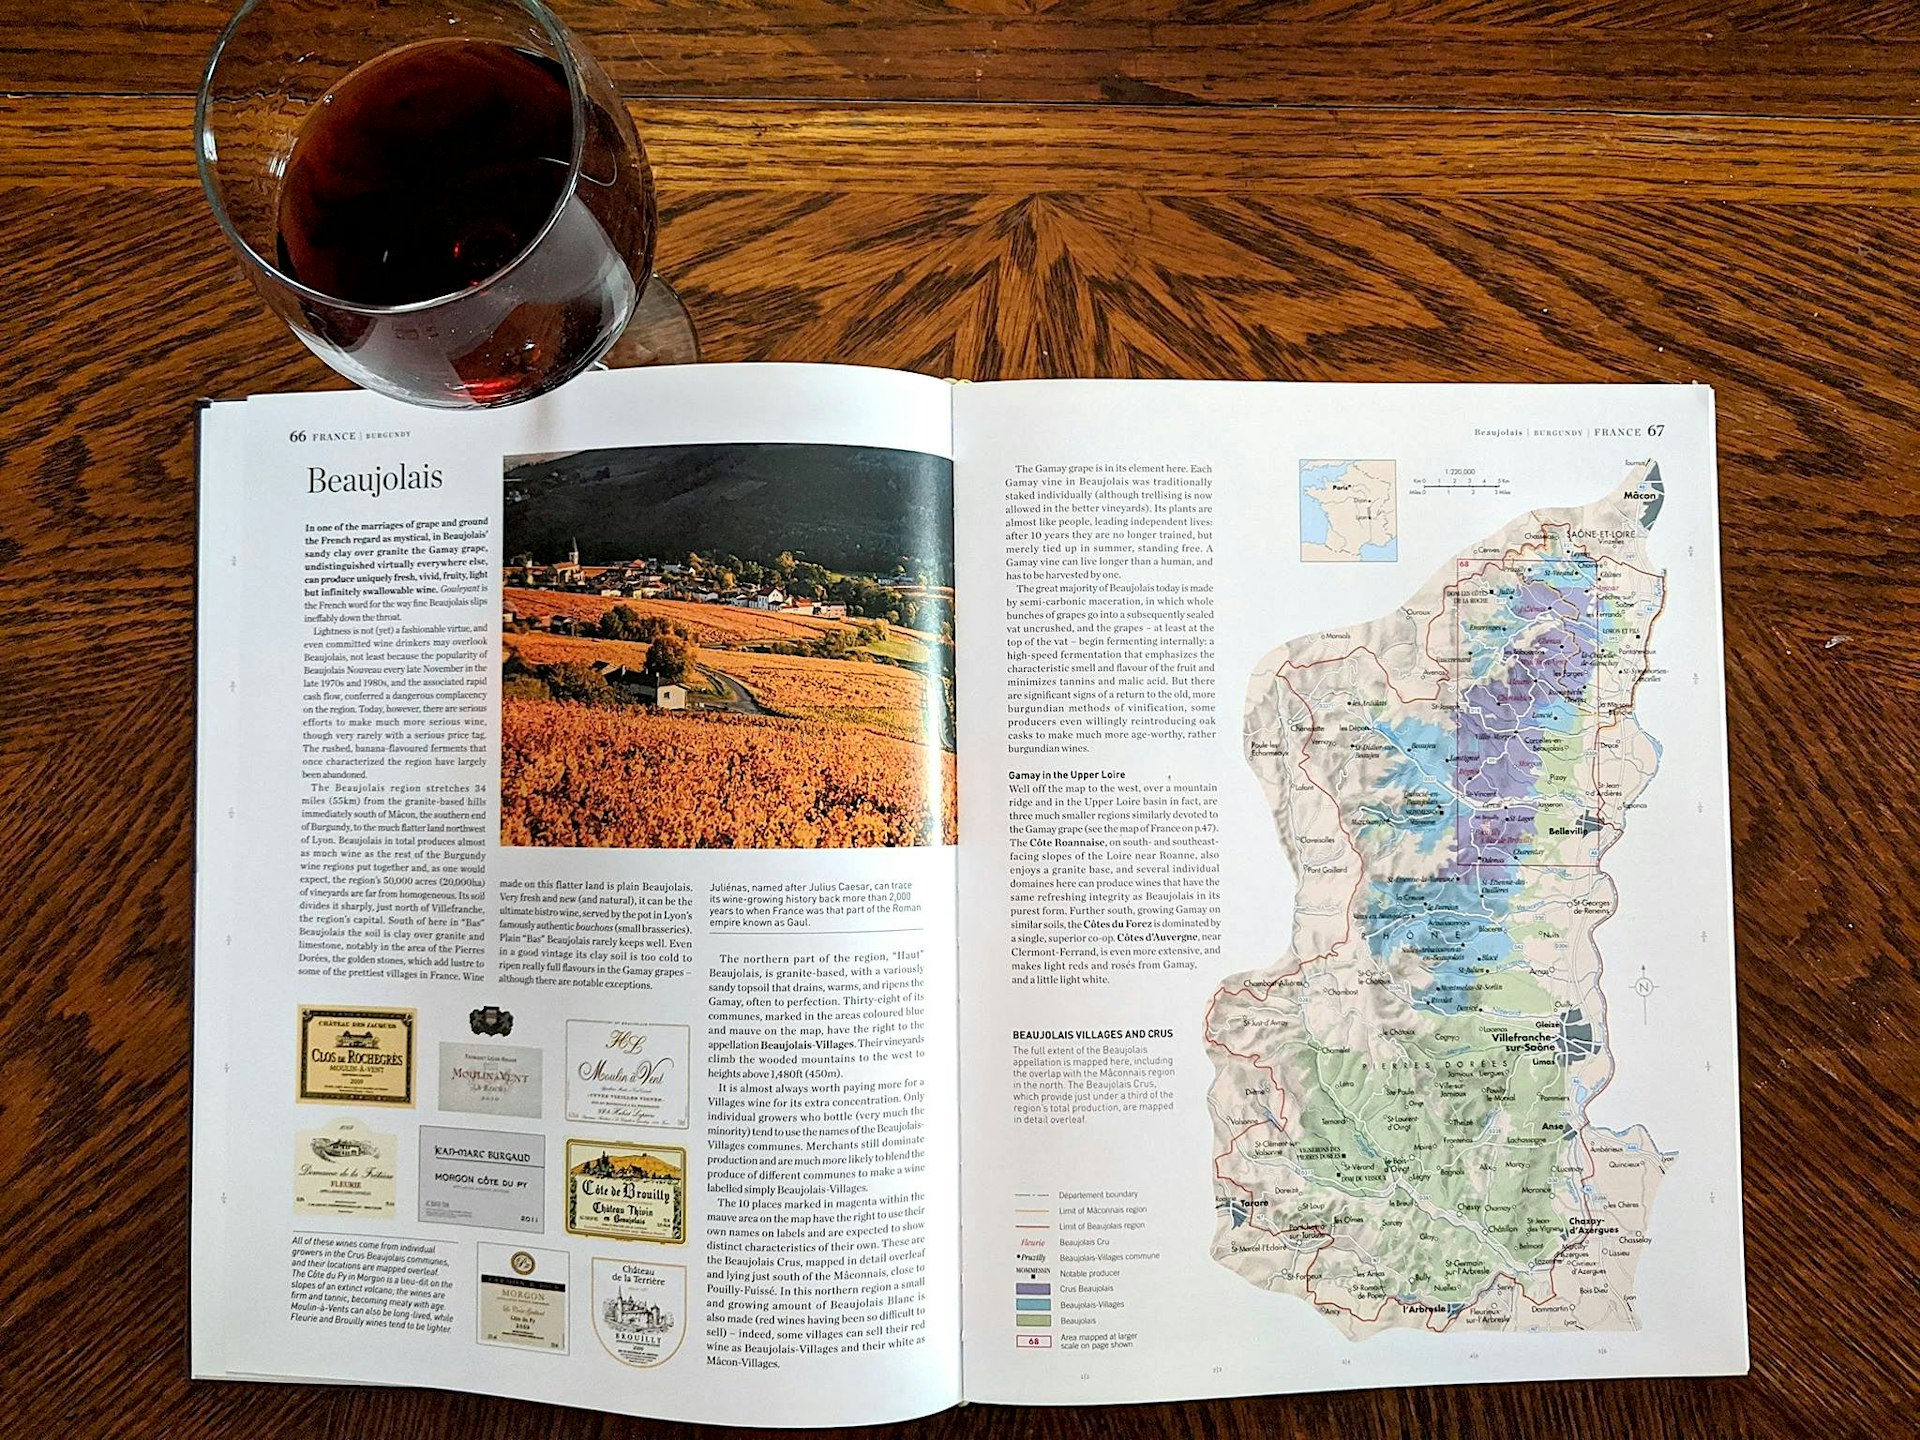 A glass of red wine sits on a oak table next to an open wine atlas